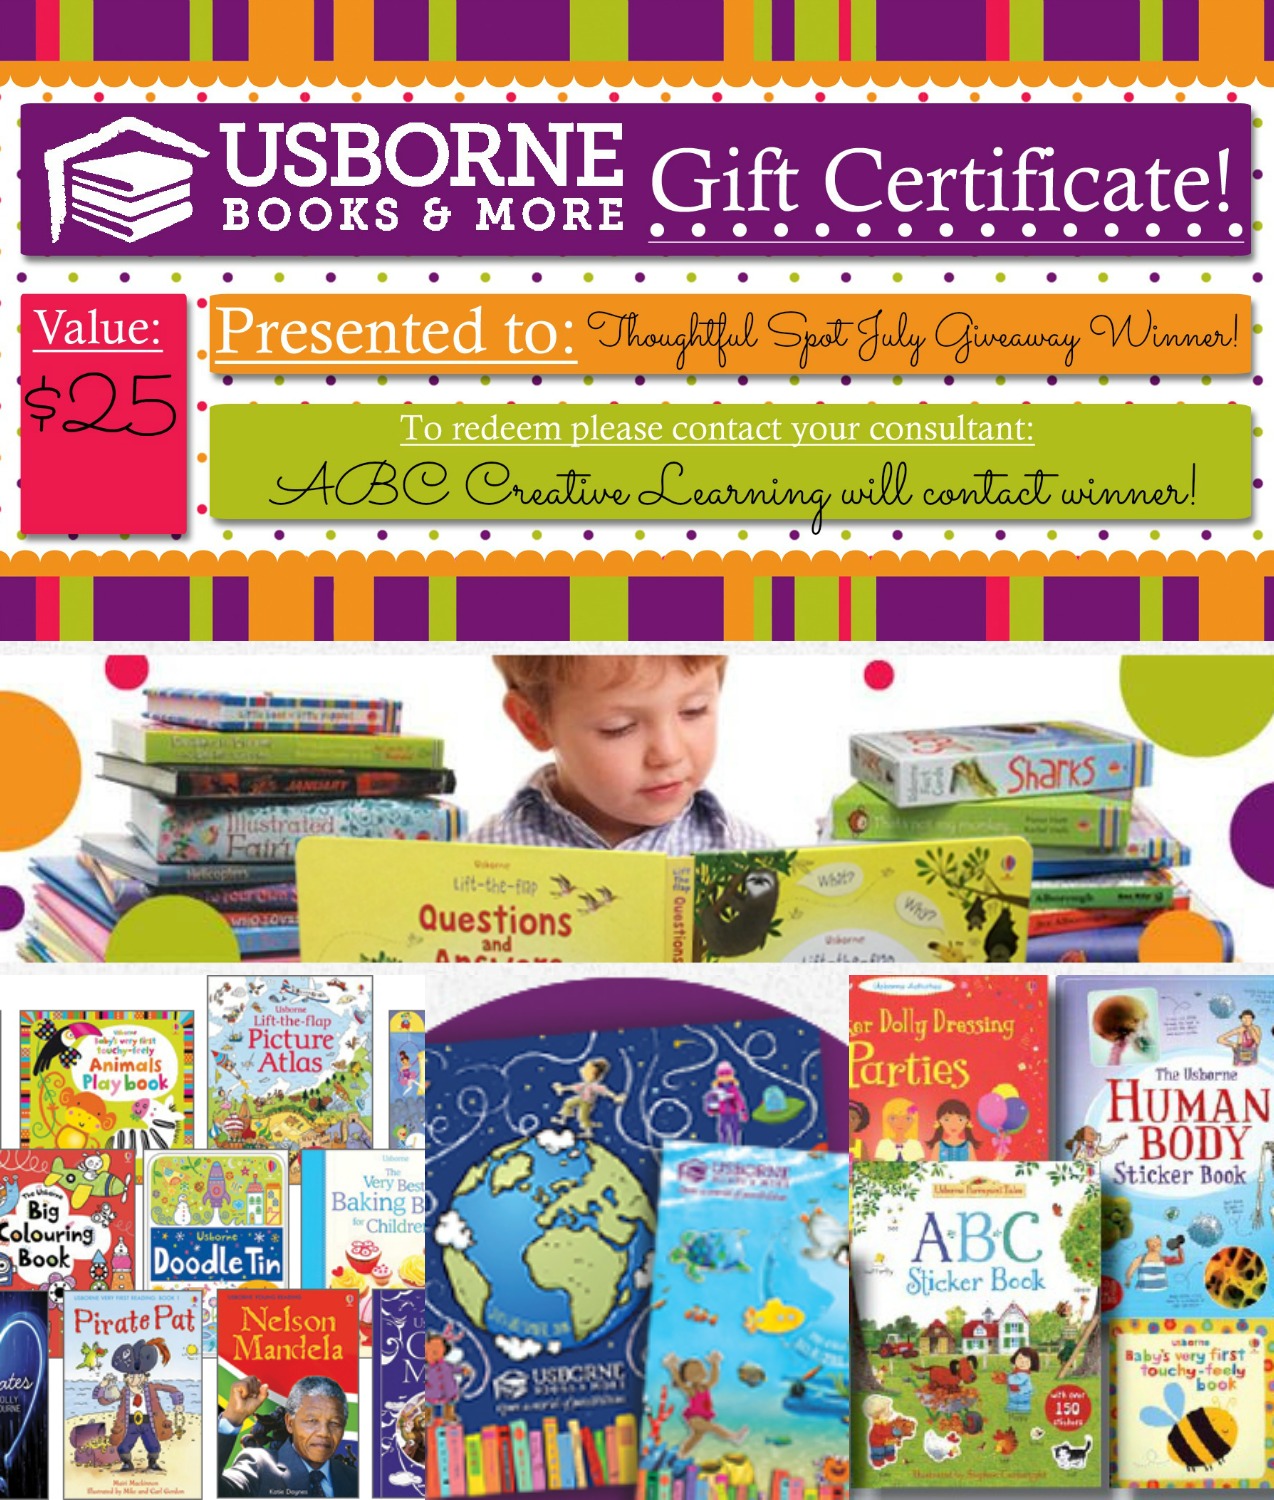 Thoughtful Spot Weekly Blog Hop Reading Giveaway from ABC Creative Learning